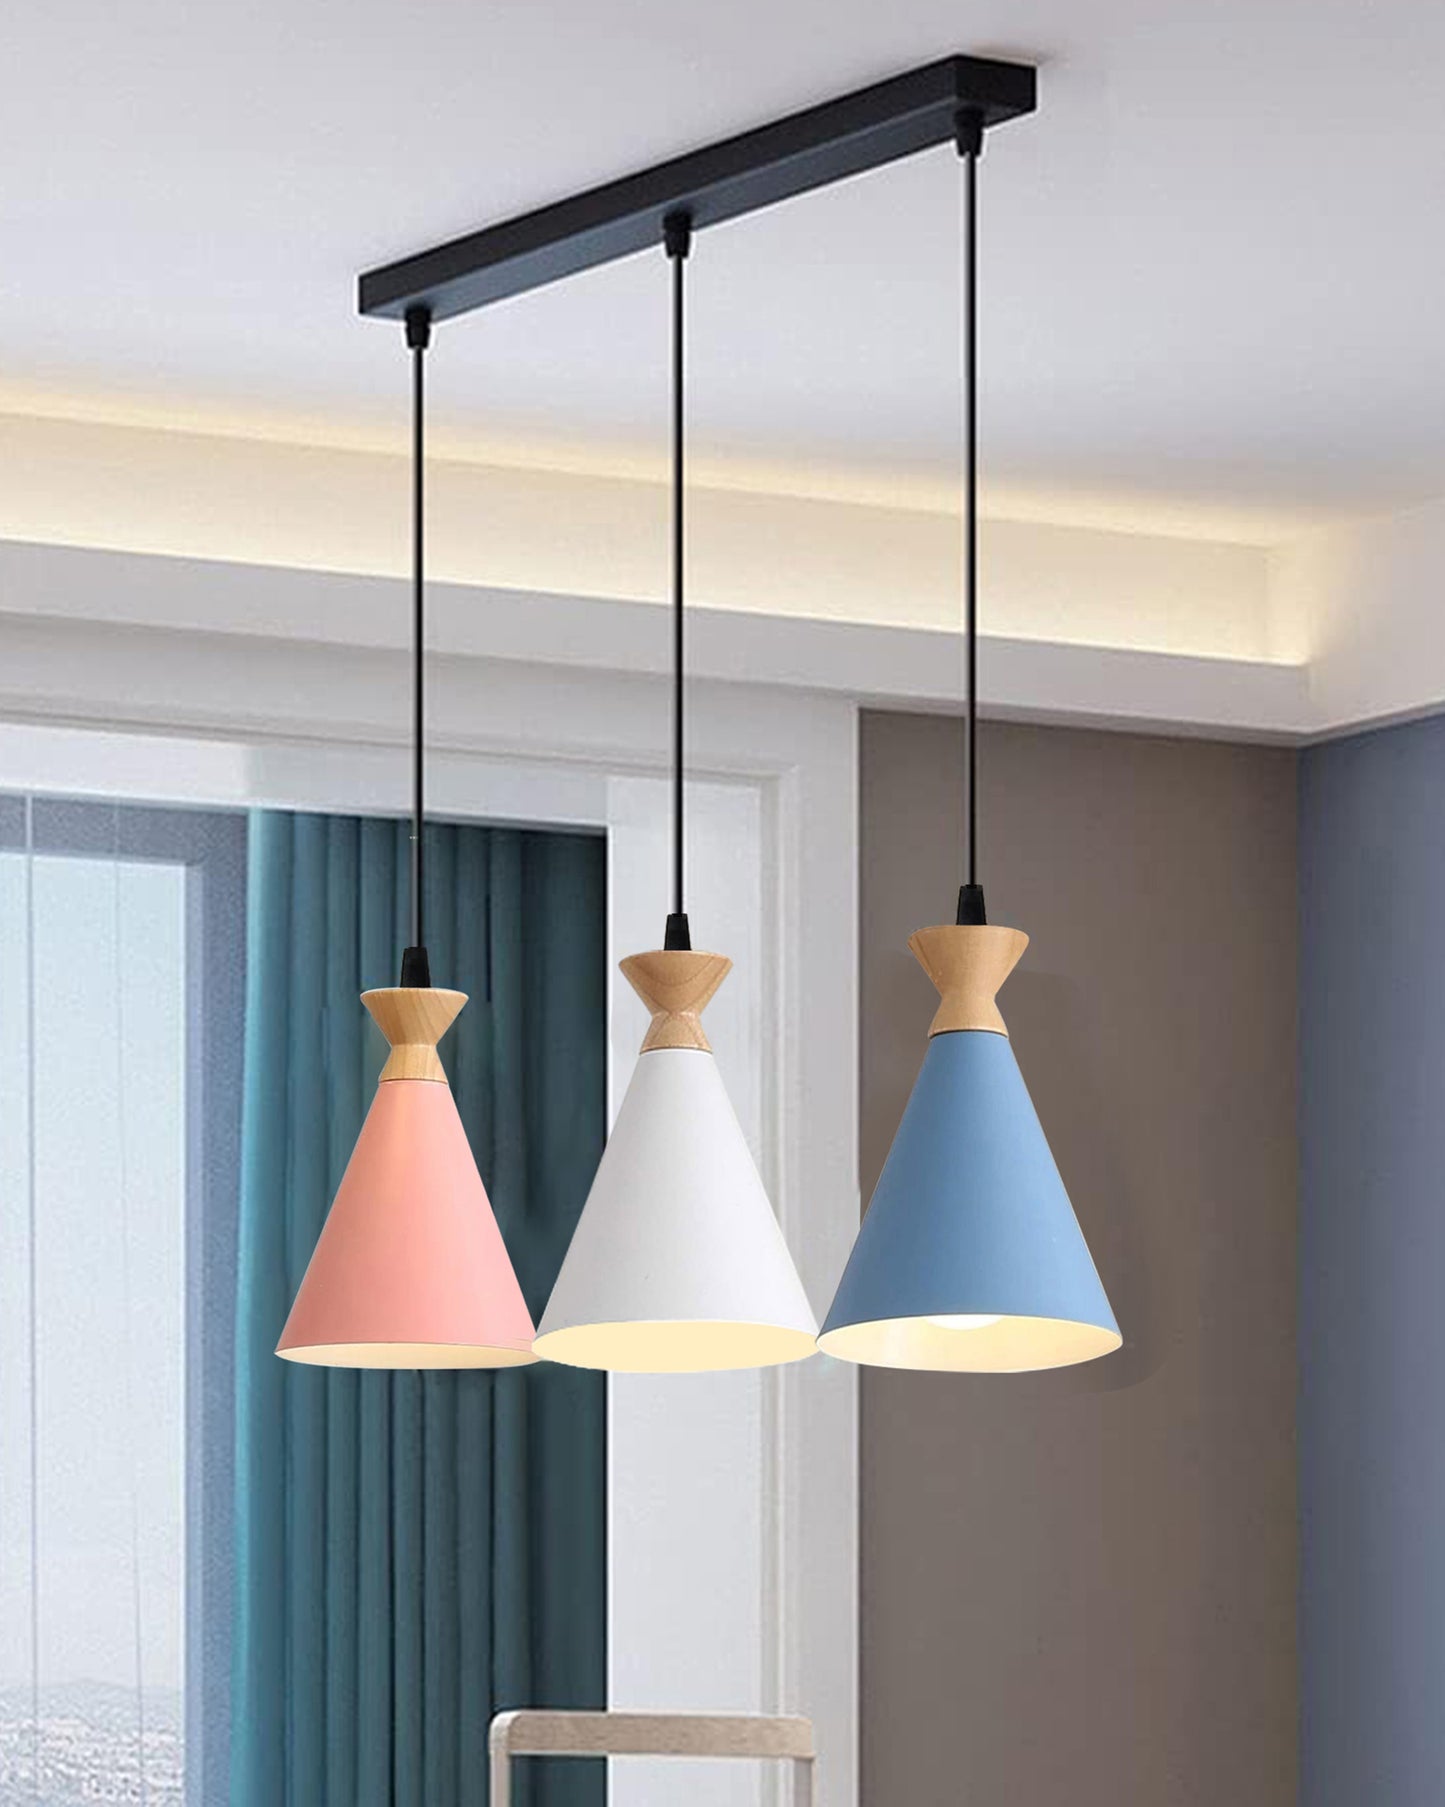 Pendant Lamp Shade for Kitchen Island, Color Metal Minimal Pot Pendant Light Shades, Nordic Style for Bedroom, Living Room, Multi Triangle